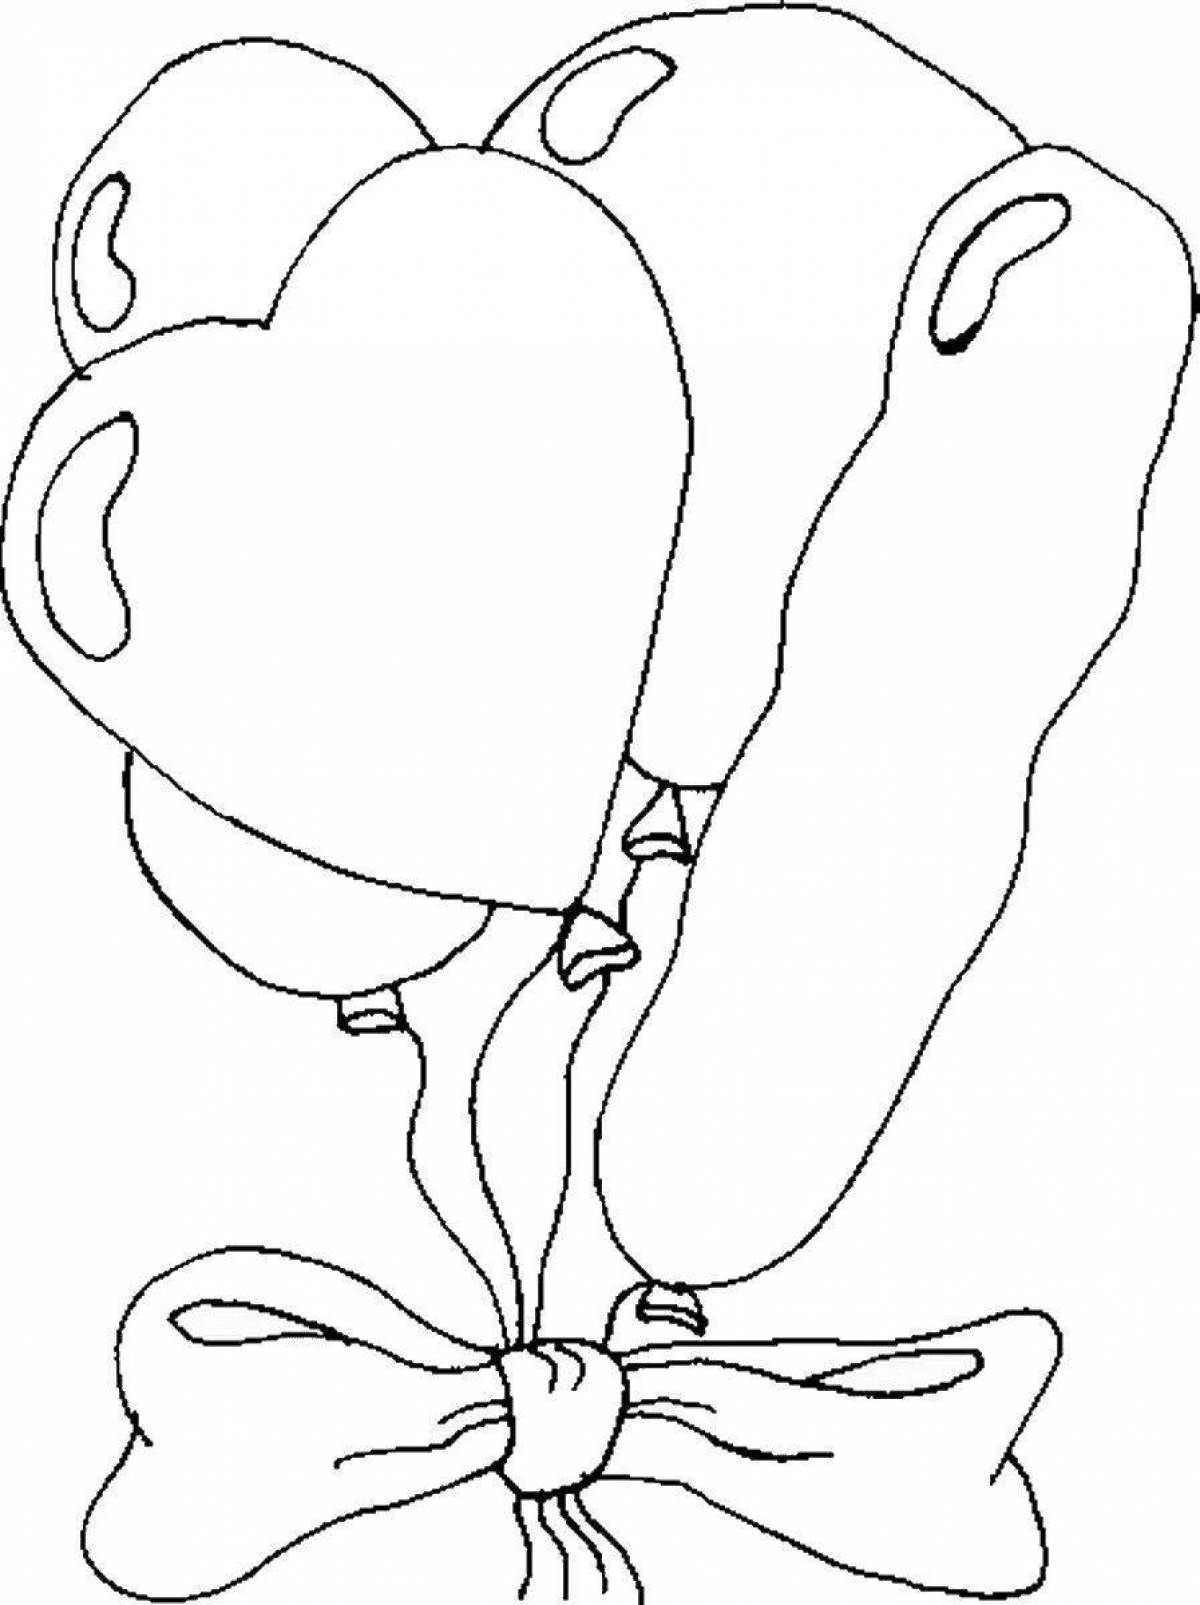 Glitter bunch of balloons coloring page